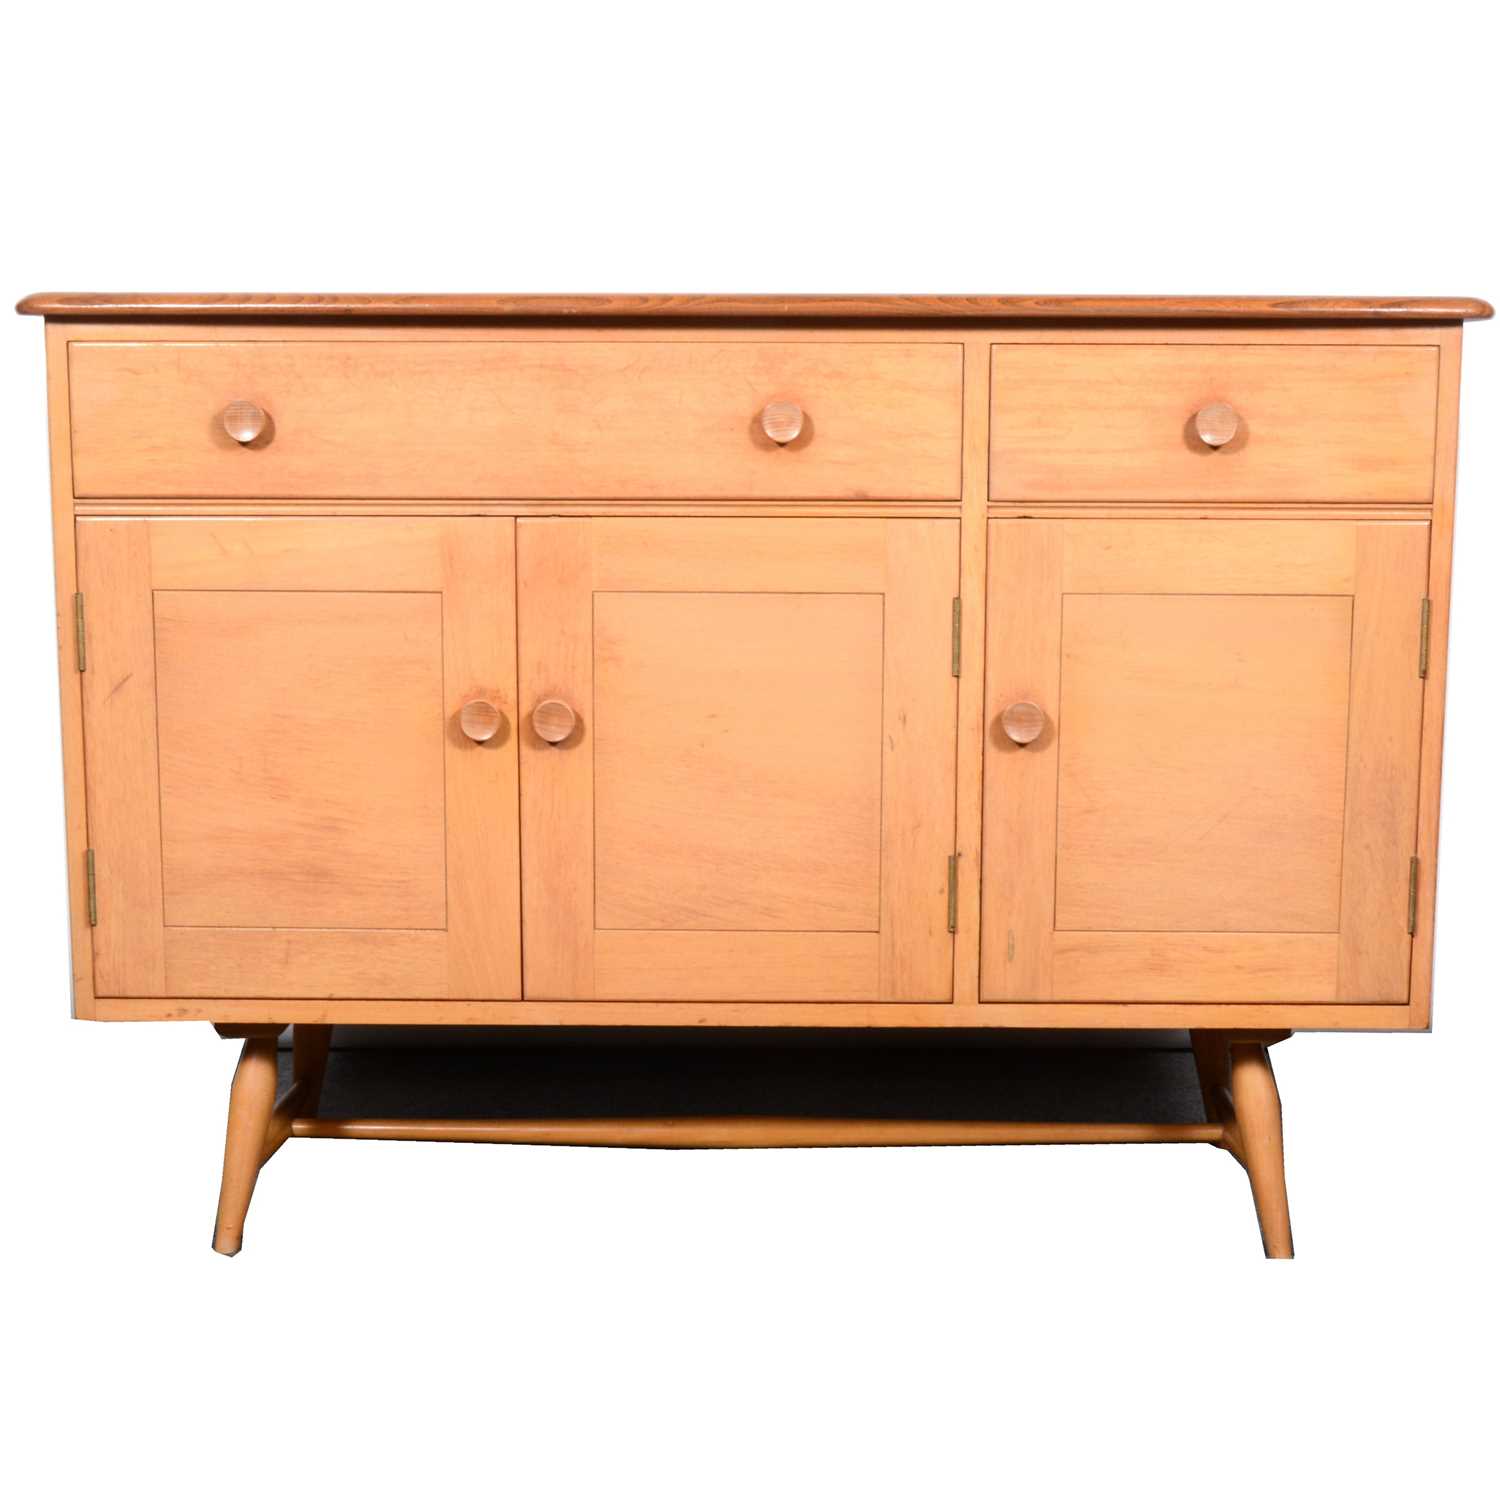 Lot 669 - An elm and beech sideboard by Ercol, model 351